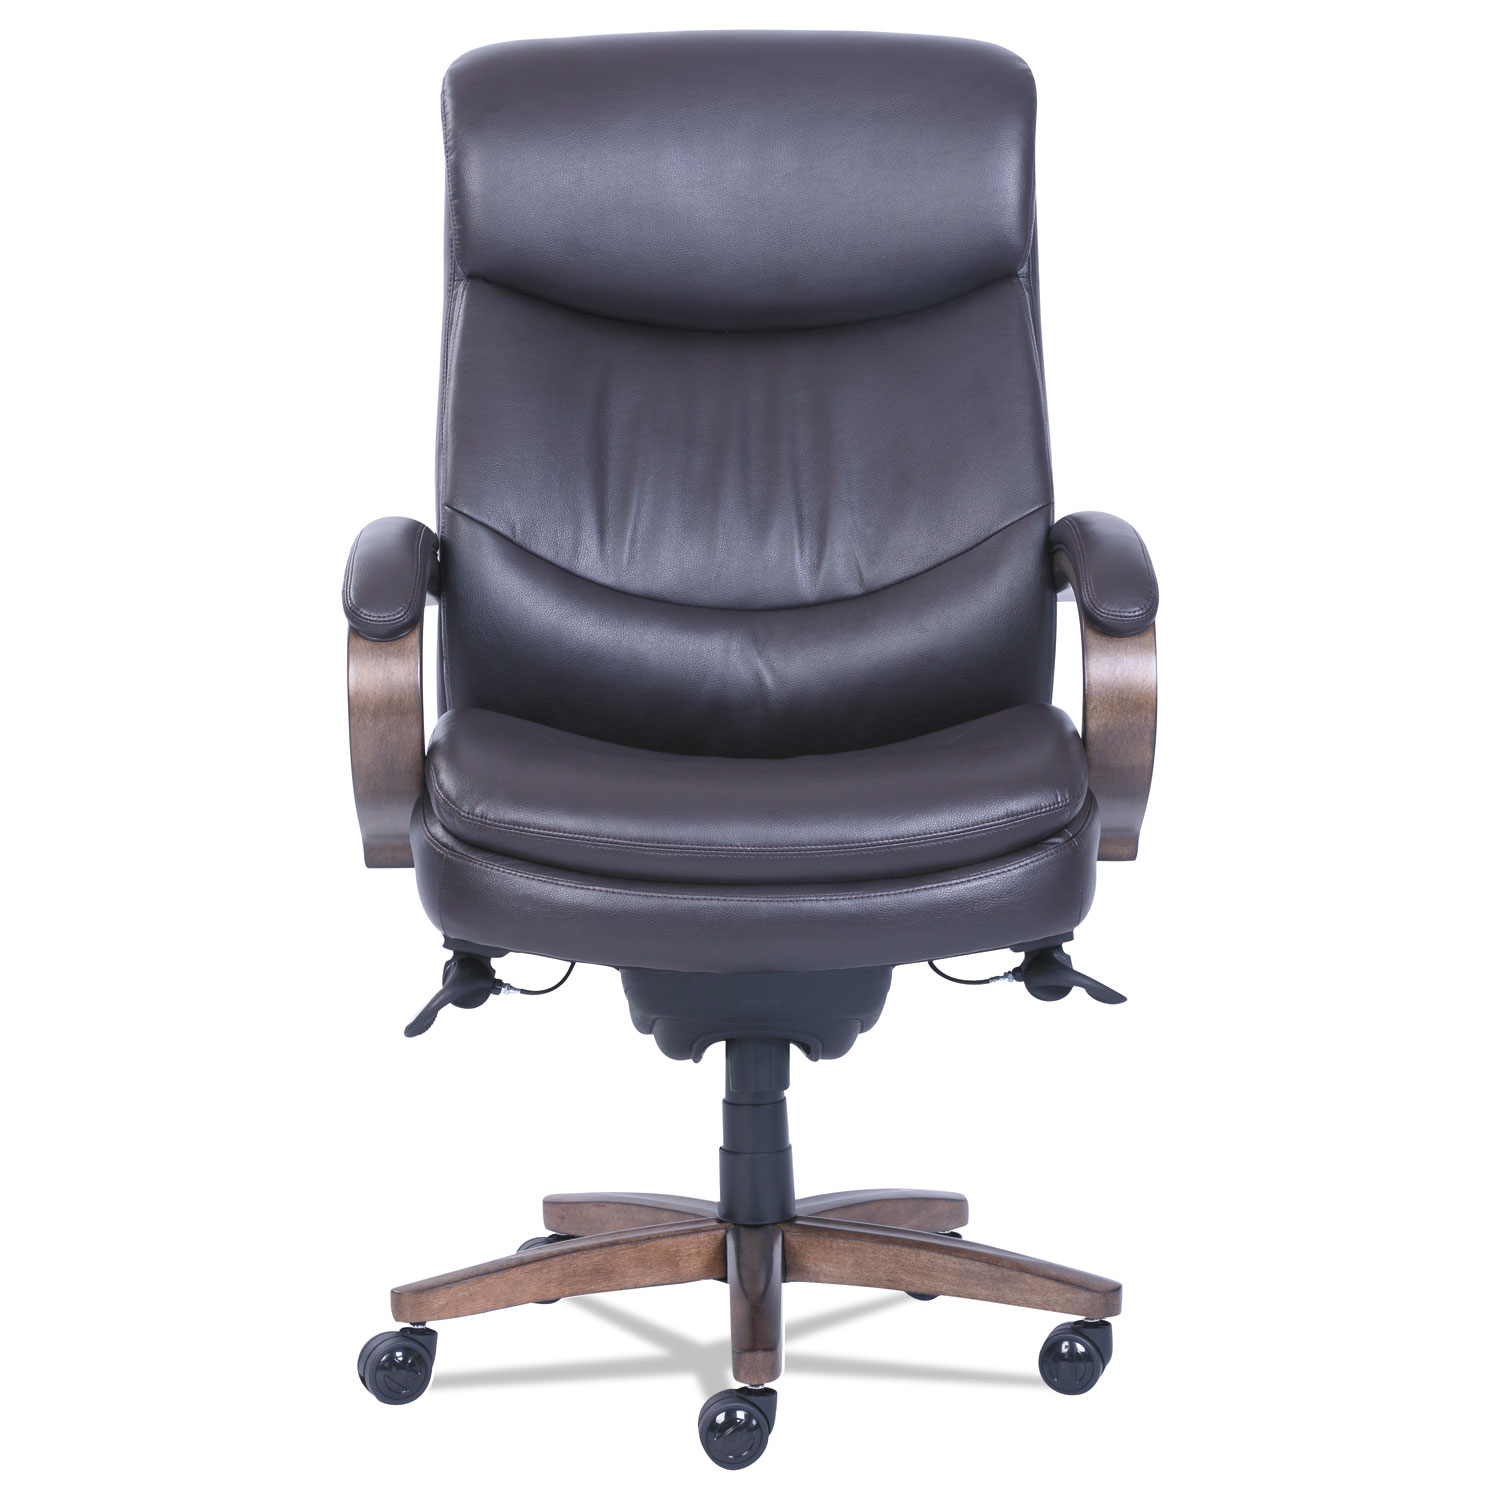 Woodbury Big and Tall Executive Chair, Supports up to 400 lbs., Brown Seat/Brown Back, Weathered Sand Base